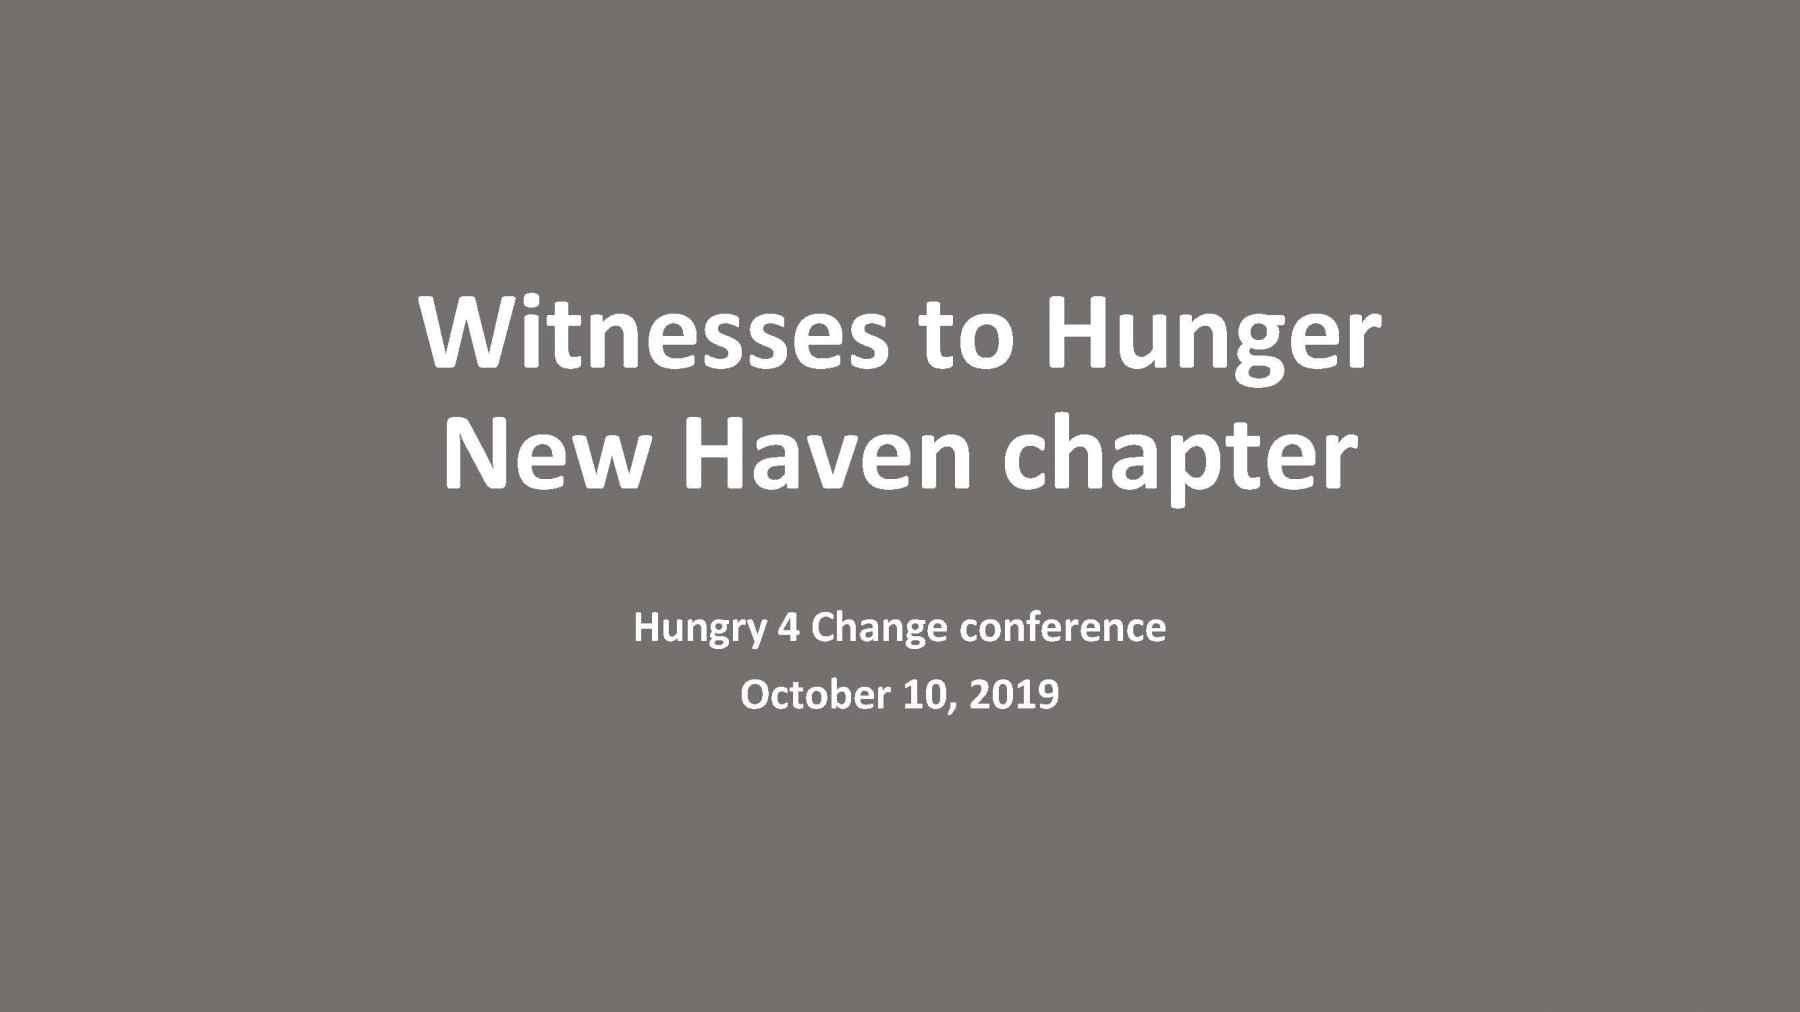 Witnesses-to-Hunger-for-Hungry-4-Change-2019-1_Page_1.jpeg